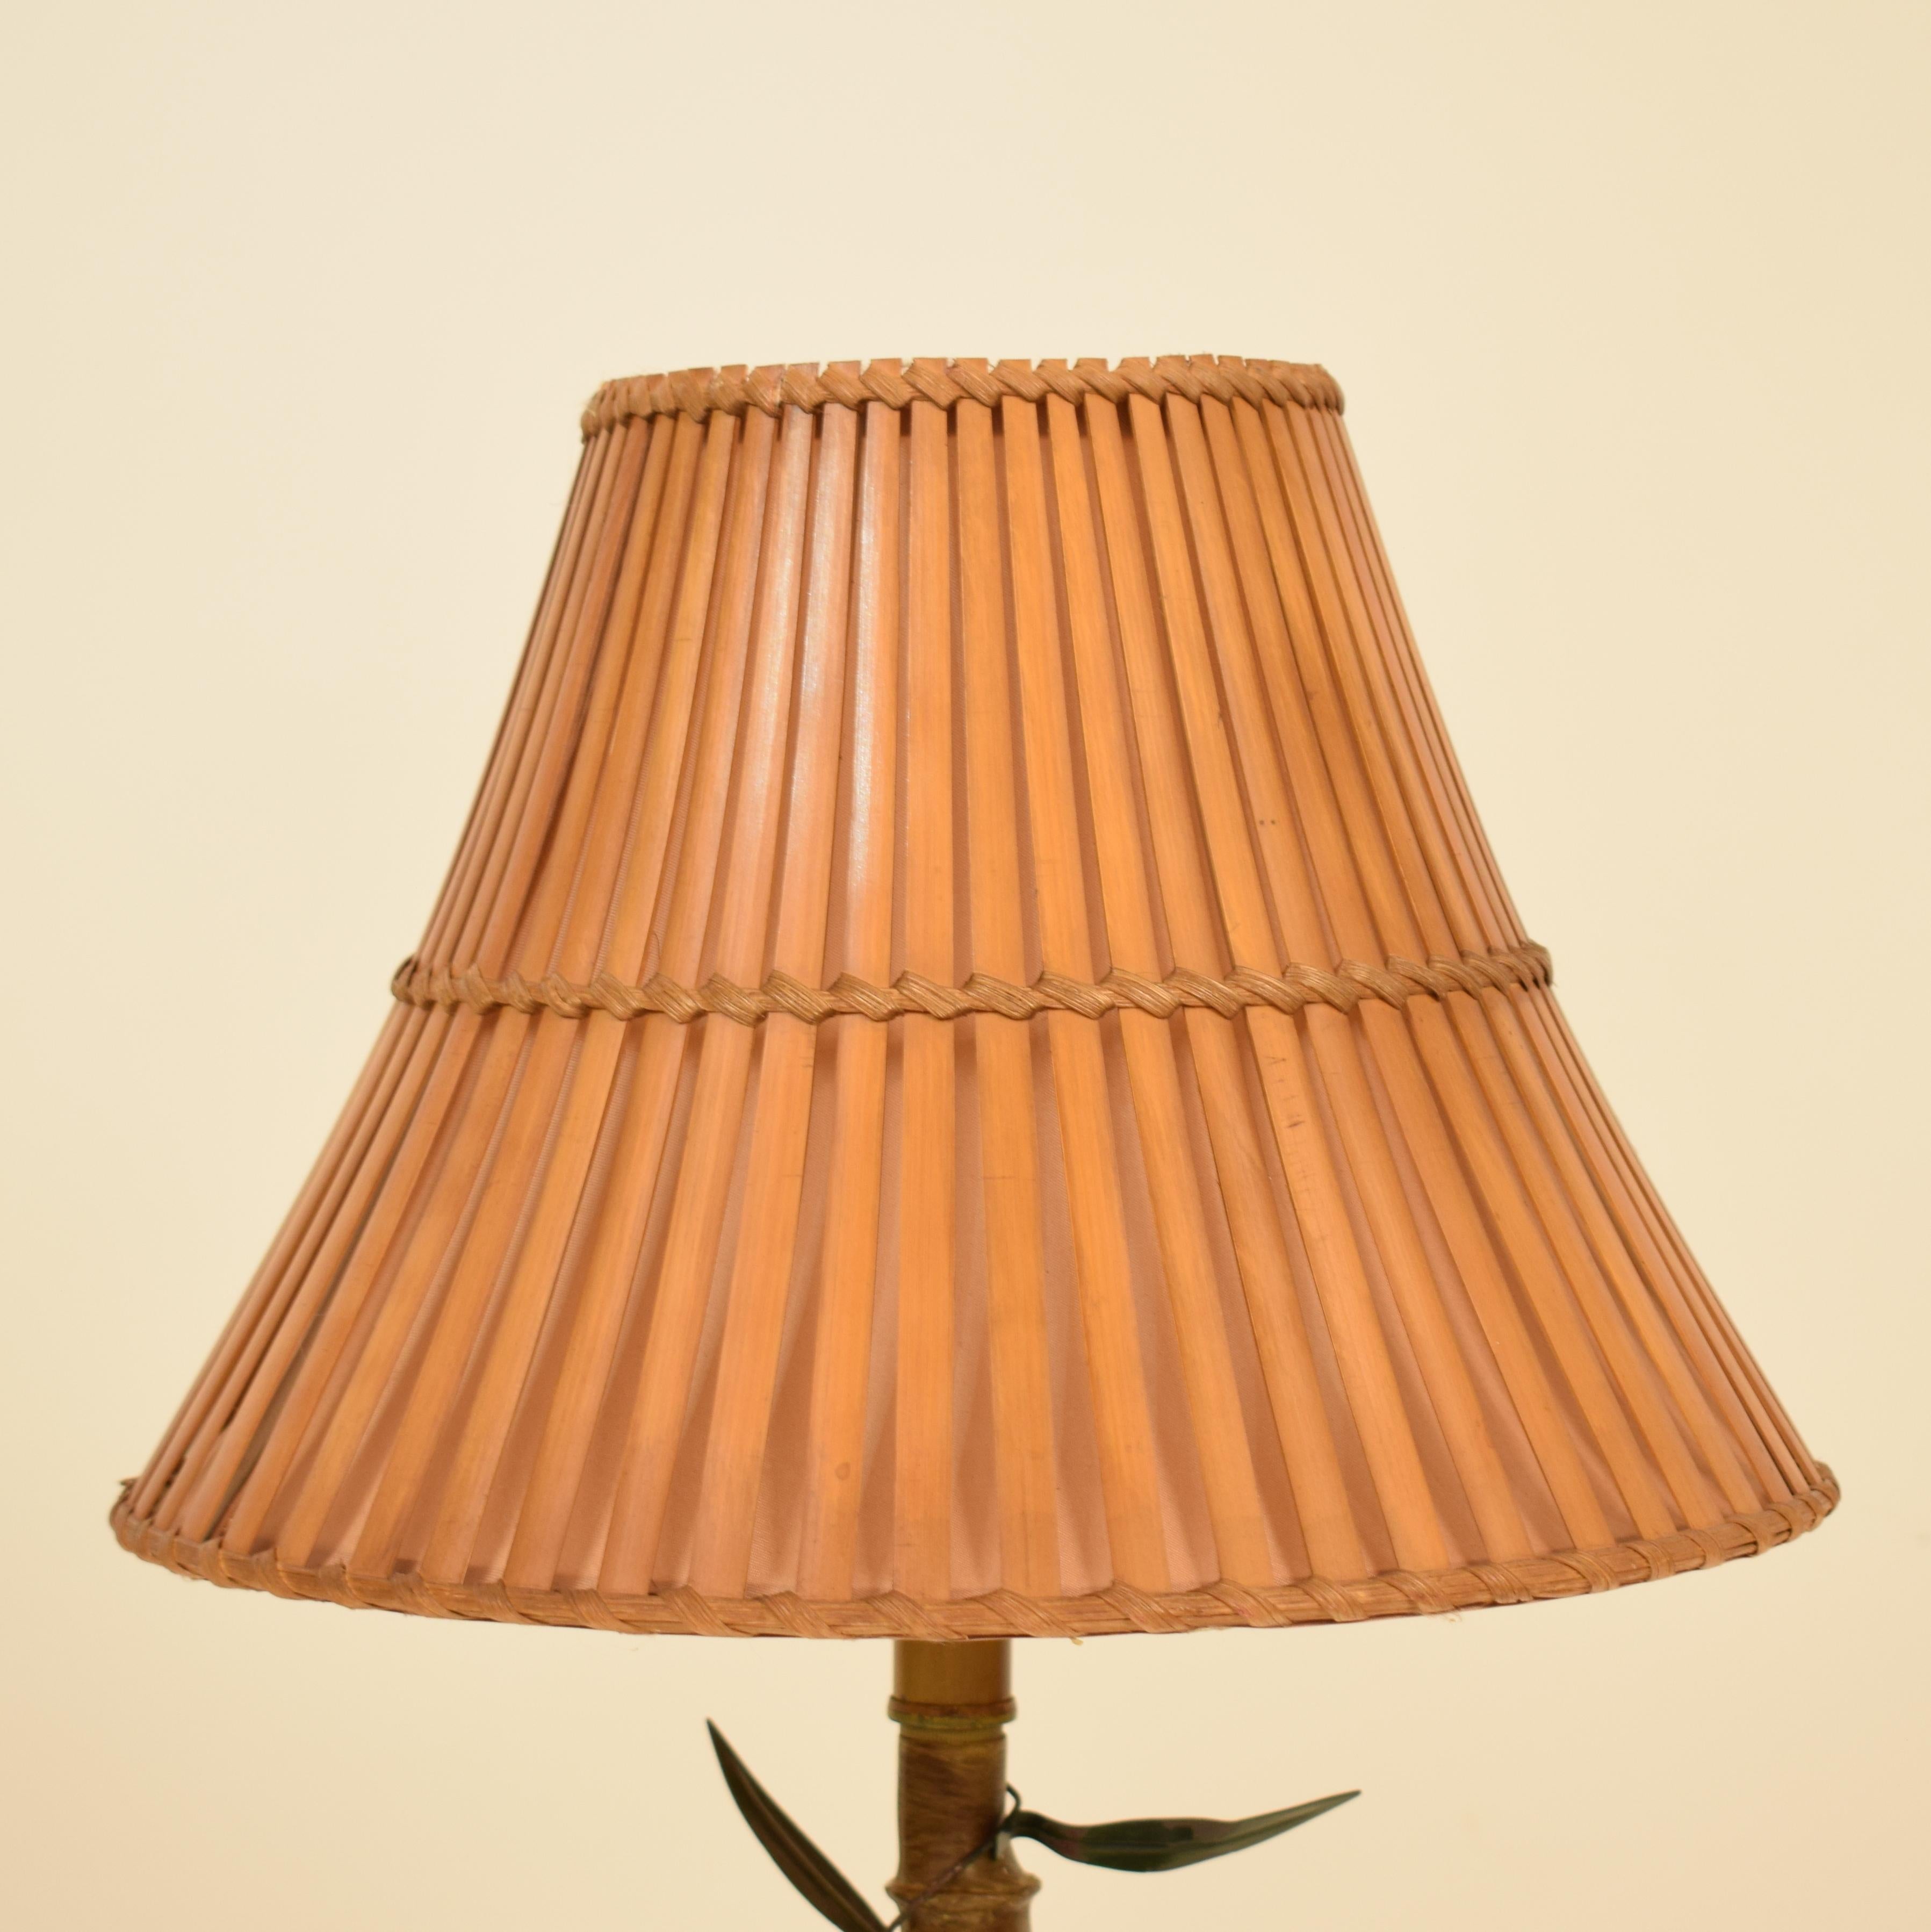 Hand-Painted Midcentury Italian Faux Bamboo Table Lamp with Parrots and Bamboo Lamp Shade